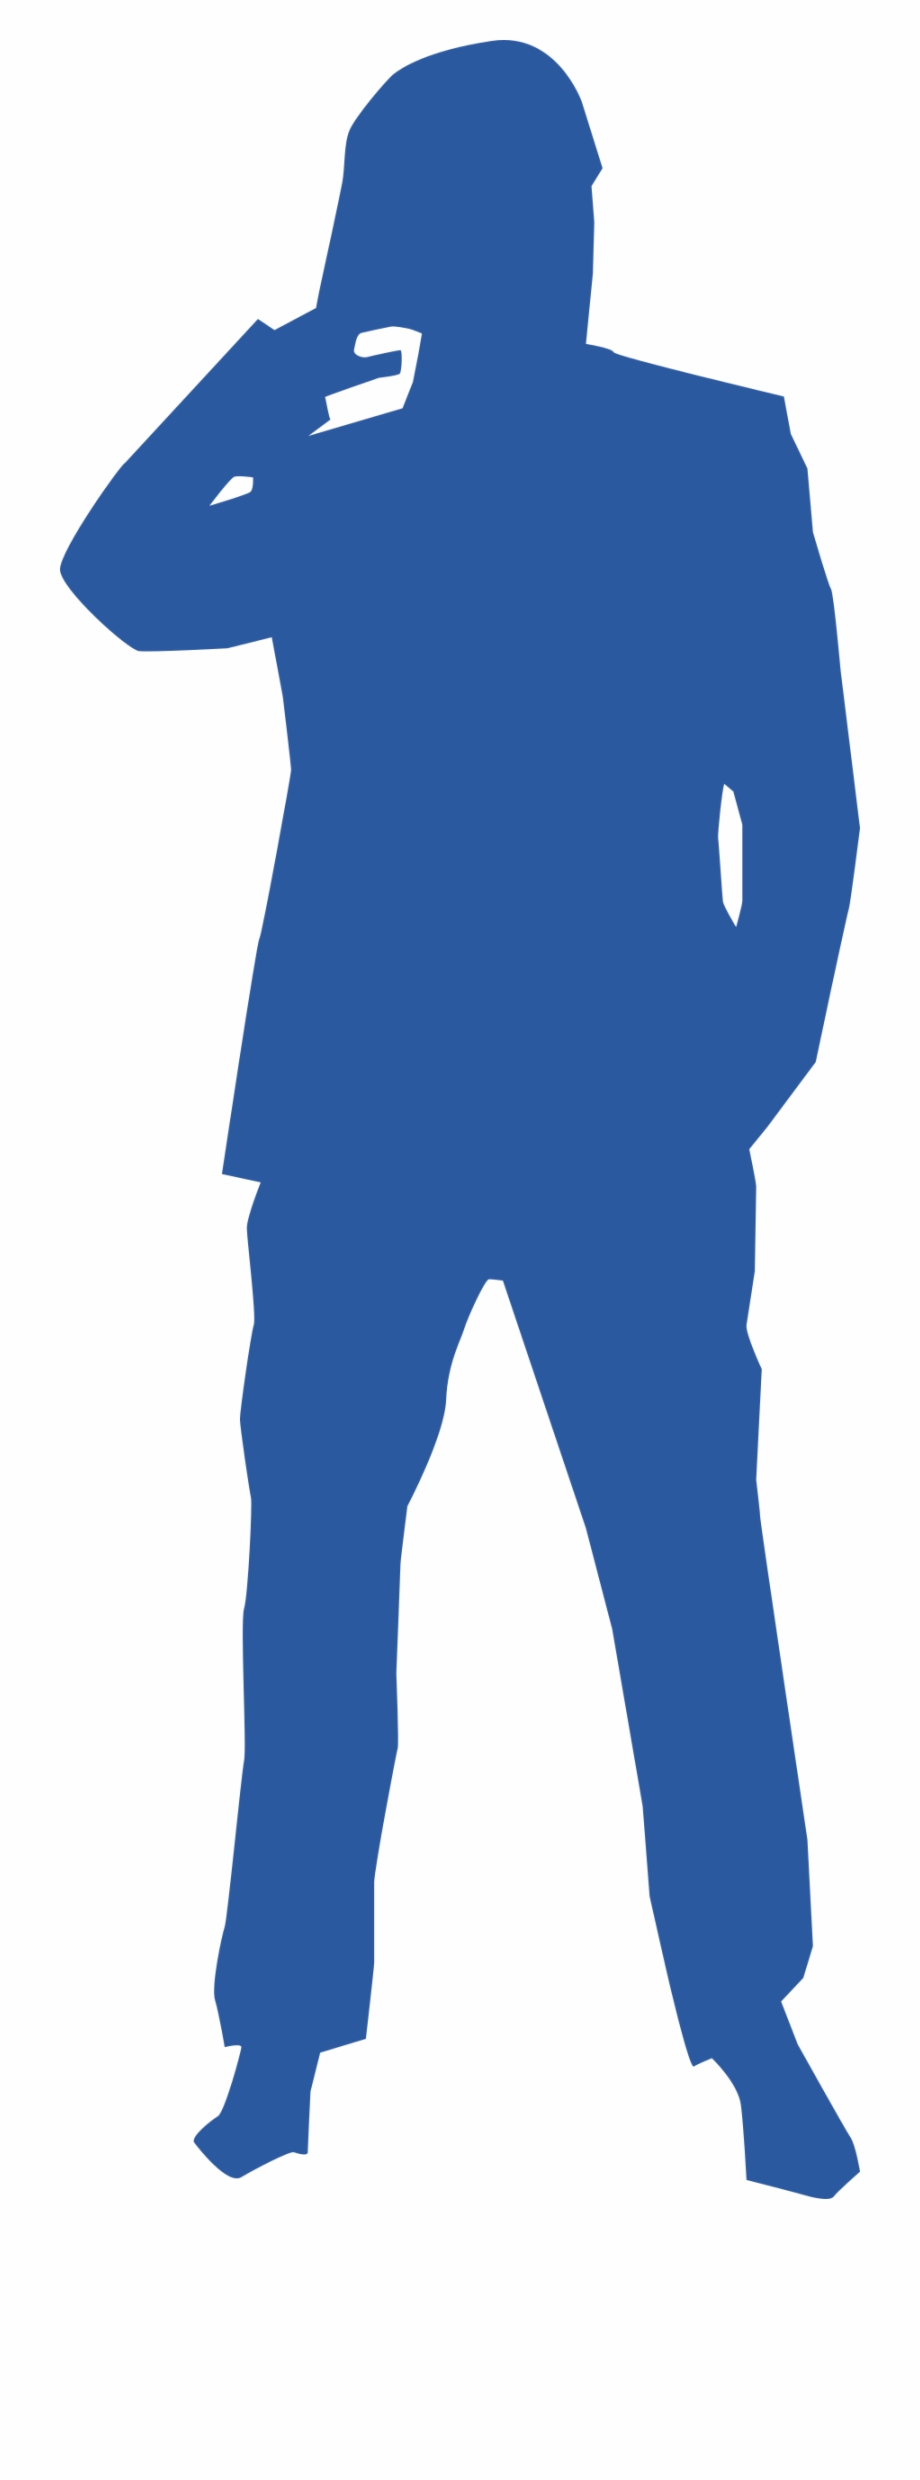 This Free Icons Png Design Of Thinking Man